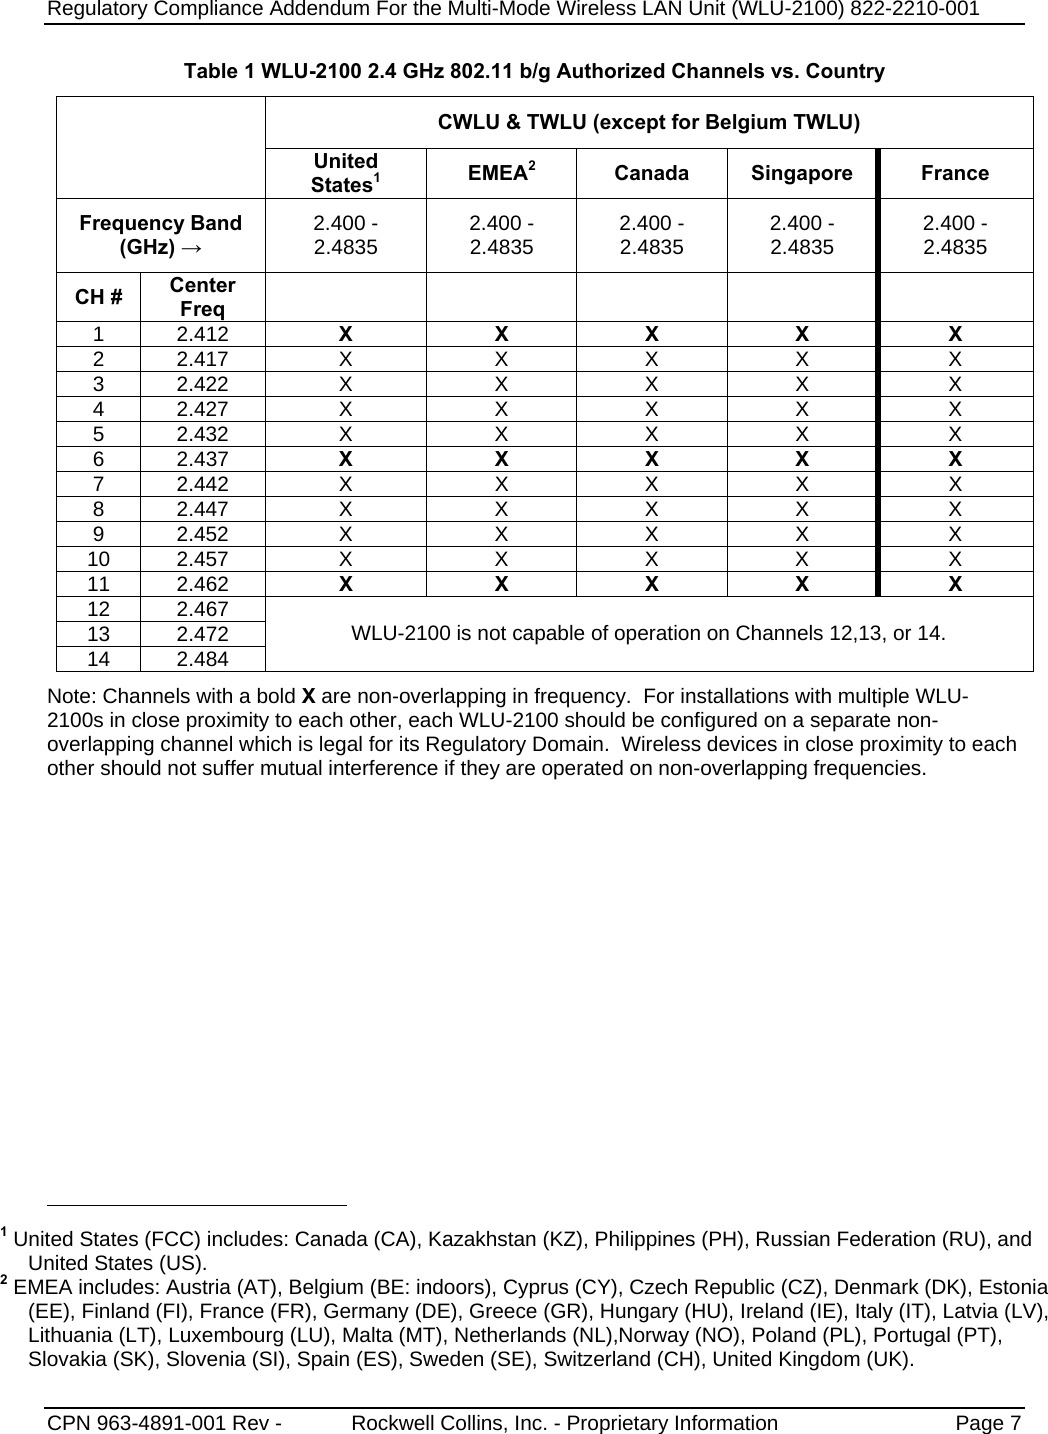 Regulatory Compliance Addendum For the Multi-Mode Wireless LAN Unit (WLU-2100) 822-2210-001   CPN 963-4891-001 Rev -            Rockwell Collins, Inc. - Proprietary Information  Page 7  Table 1 WLU-2100 2.4 GHz 802.11 b/g Authorized Channels vs. Country CWLU &amp; TWLU (except for Belgium TWLU)  United States1 EMEA2 Canada Singapore France Frequency Band  (GHz) → 2.400 -  2.4835  2.400 -2.4835  2.400 -2.4835  2.400 -2.4835  2.400 - 2.4835 CH #  Center Freq       1 2.412  X X X X X 2 2.417  X  X  X  X  X 3 2.422  X  X  X  X  X 4 2.427  X  X  X  X  X 5 2.432  X  X  X  X  X 6 2.437  X X X X X 7 2.442  X  X  X X X 8 2.447  X  X  X  X  X 9 2.452  X  X  X  X  X 10 2.457  X  X  X  X  X 11 2.462  X X X X X 12 2.467 13 2.472 14 2.484 WLU-2100 is not capable of operation on Channels 12,13, or 14. Note: Channels with a bold X are non-overlapping in frequency.  For installations with multiple WLU-2100s in close proximity to each other, each WLU-2100 should be configured on a separate non-overlapping channel which is legal for its Regulatory Domain.  Wireless devices in close proximity to each other should not suffer mutual interference if they are operated on non-overlapping frequencies.                                                        1 United States (FCC) includes: Canada (CA), Kazakhstan (KZ), Philippines (PH), Russian Federation (RU), and United States (US). 2 EMEA includes: Austria (AT), Belgium (BE: indoors), Cyprus (CY), Czech Republic (CZ), Denmark (DK), Estonia (EE), Finland (FI), France (FR), Germany (DE), Greece (GR), Hungary (HU), Ireland (IE), Italy (IT), Latvia (LV), Lithuania (LT), Luxembourg (LU), Malta (MT), Netherlands (NL),Norway (NO), Poland (PL), Portugal (PT), Slovakia (SK), Slovenia (SI), Spain (ES), Sweden (SE), Switzerland (CH), United Kingdom (UK). 